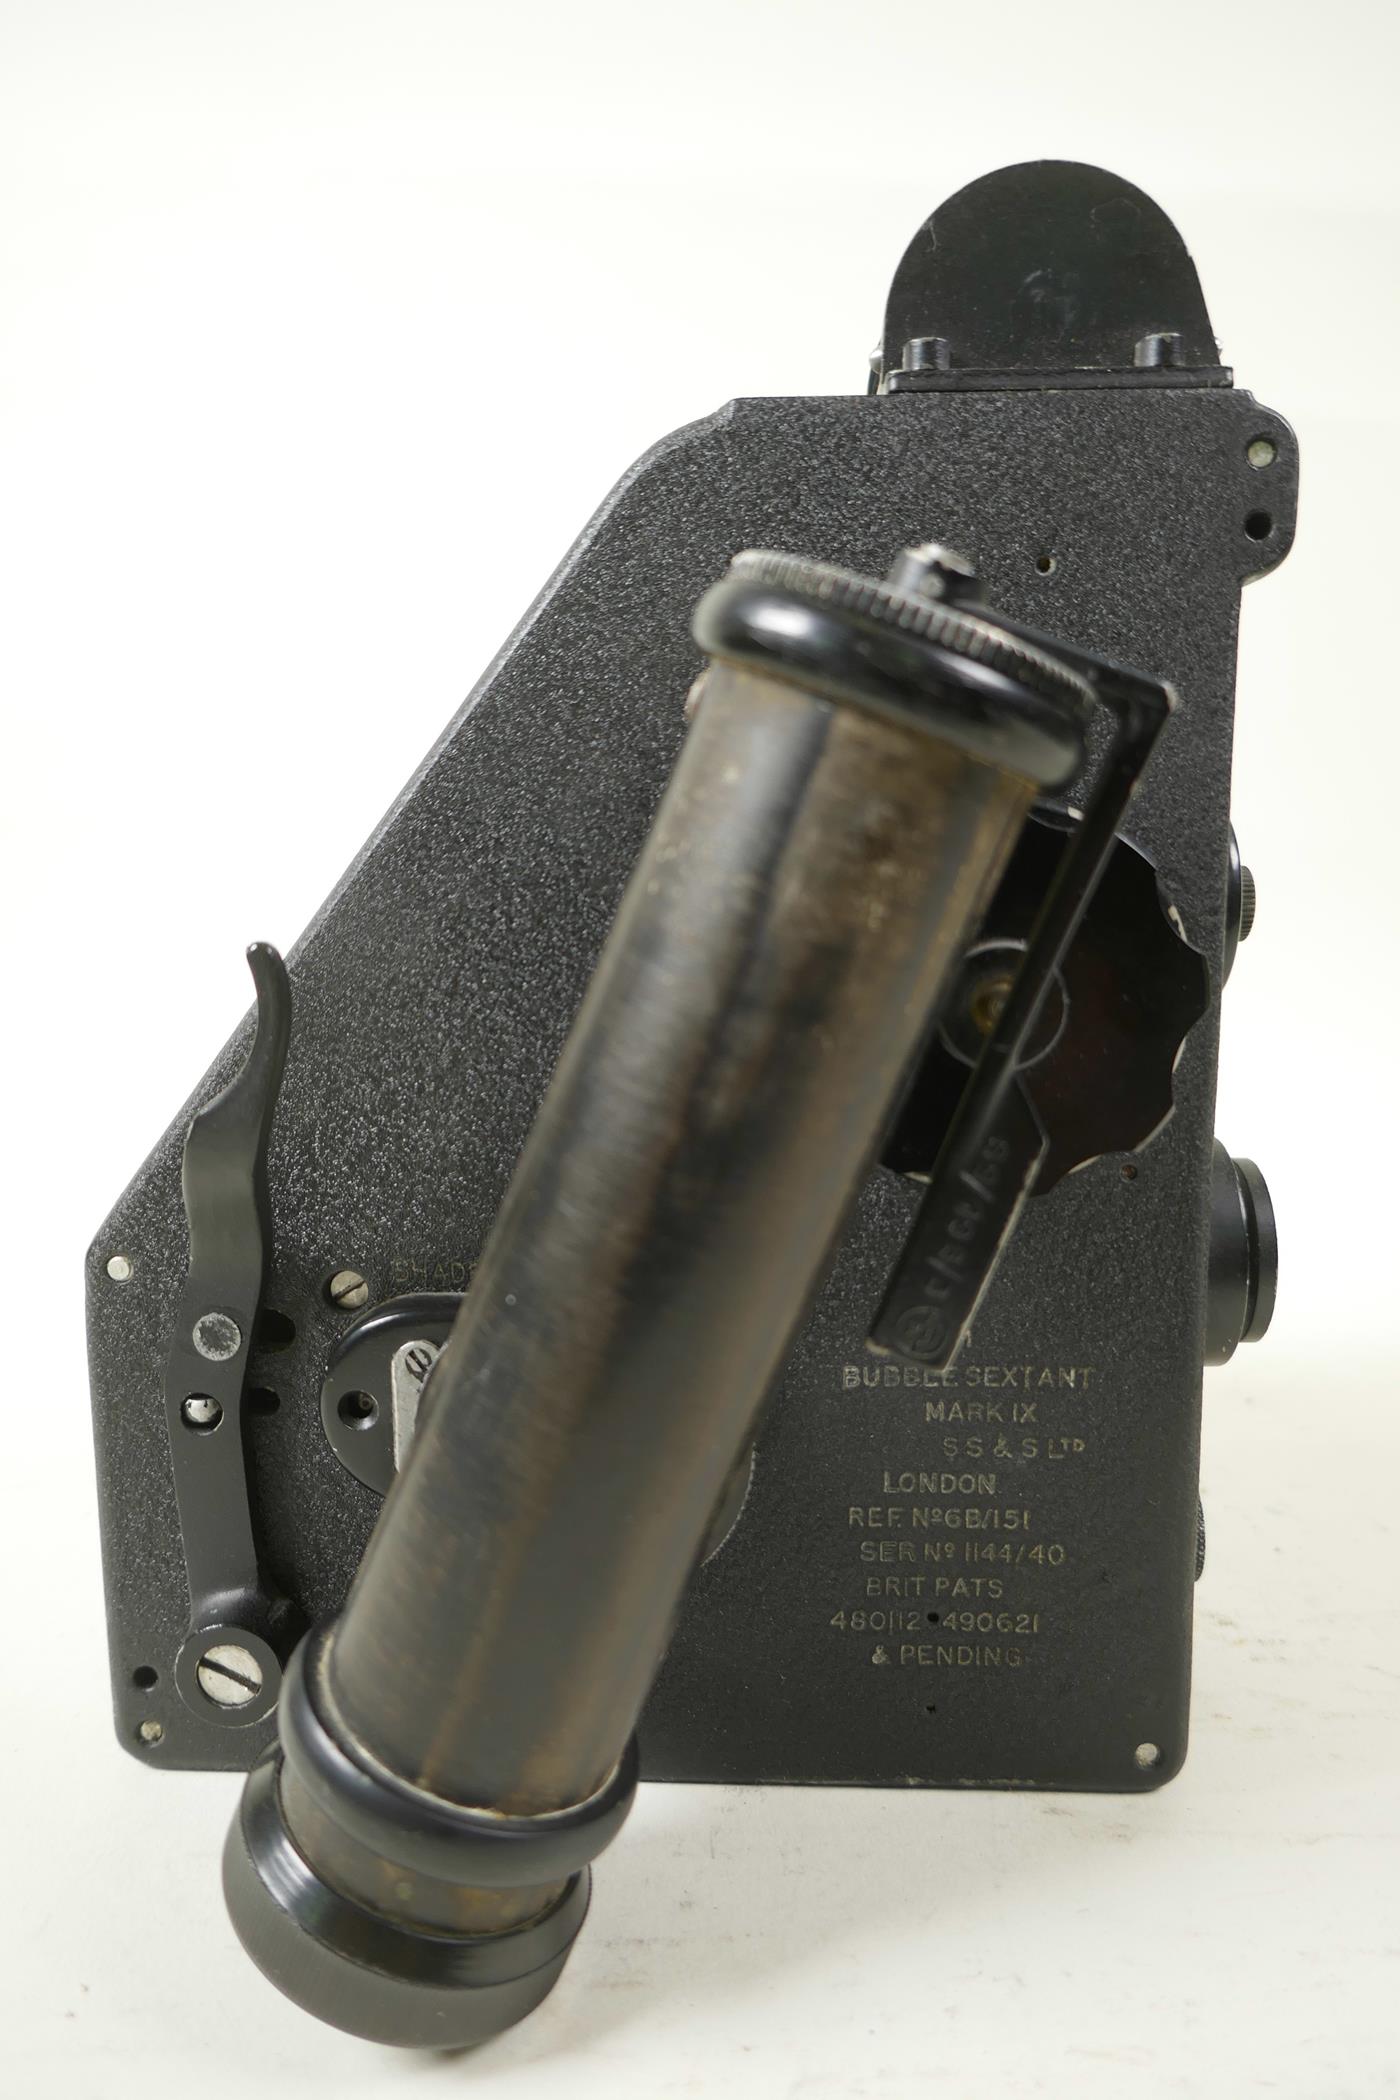 A WWII military aircraft bubble sextant mark 1x by S.S.&S. Ltd, London, ref no. 6B/151, serial no, - Image 2 of 7